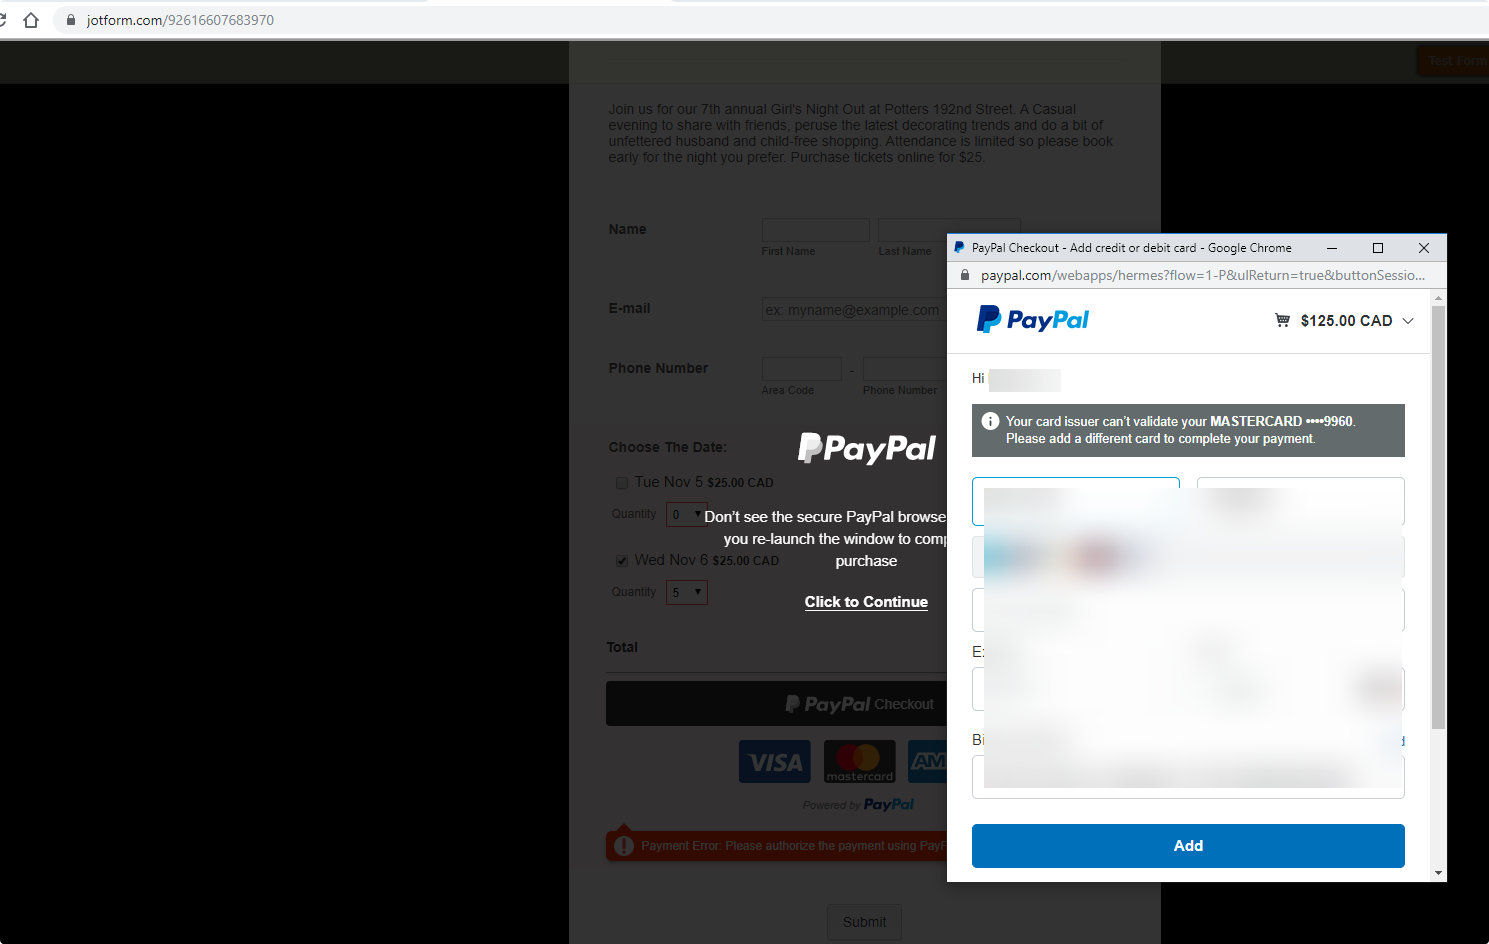 PayPal Checkout error on submit Image 2 Screenshot 51